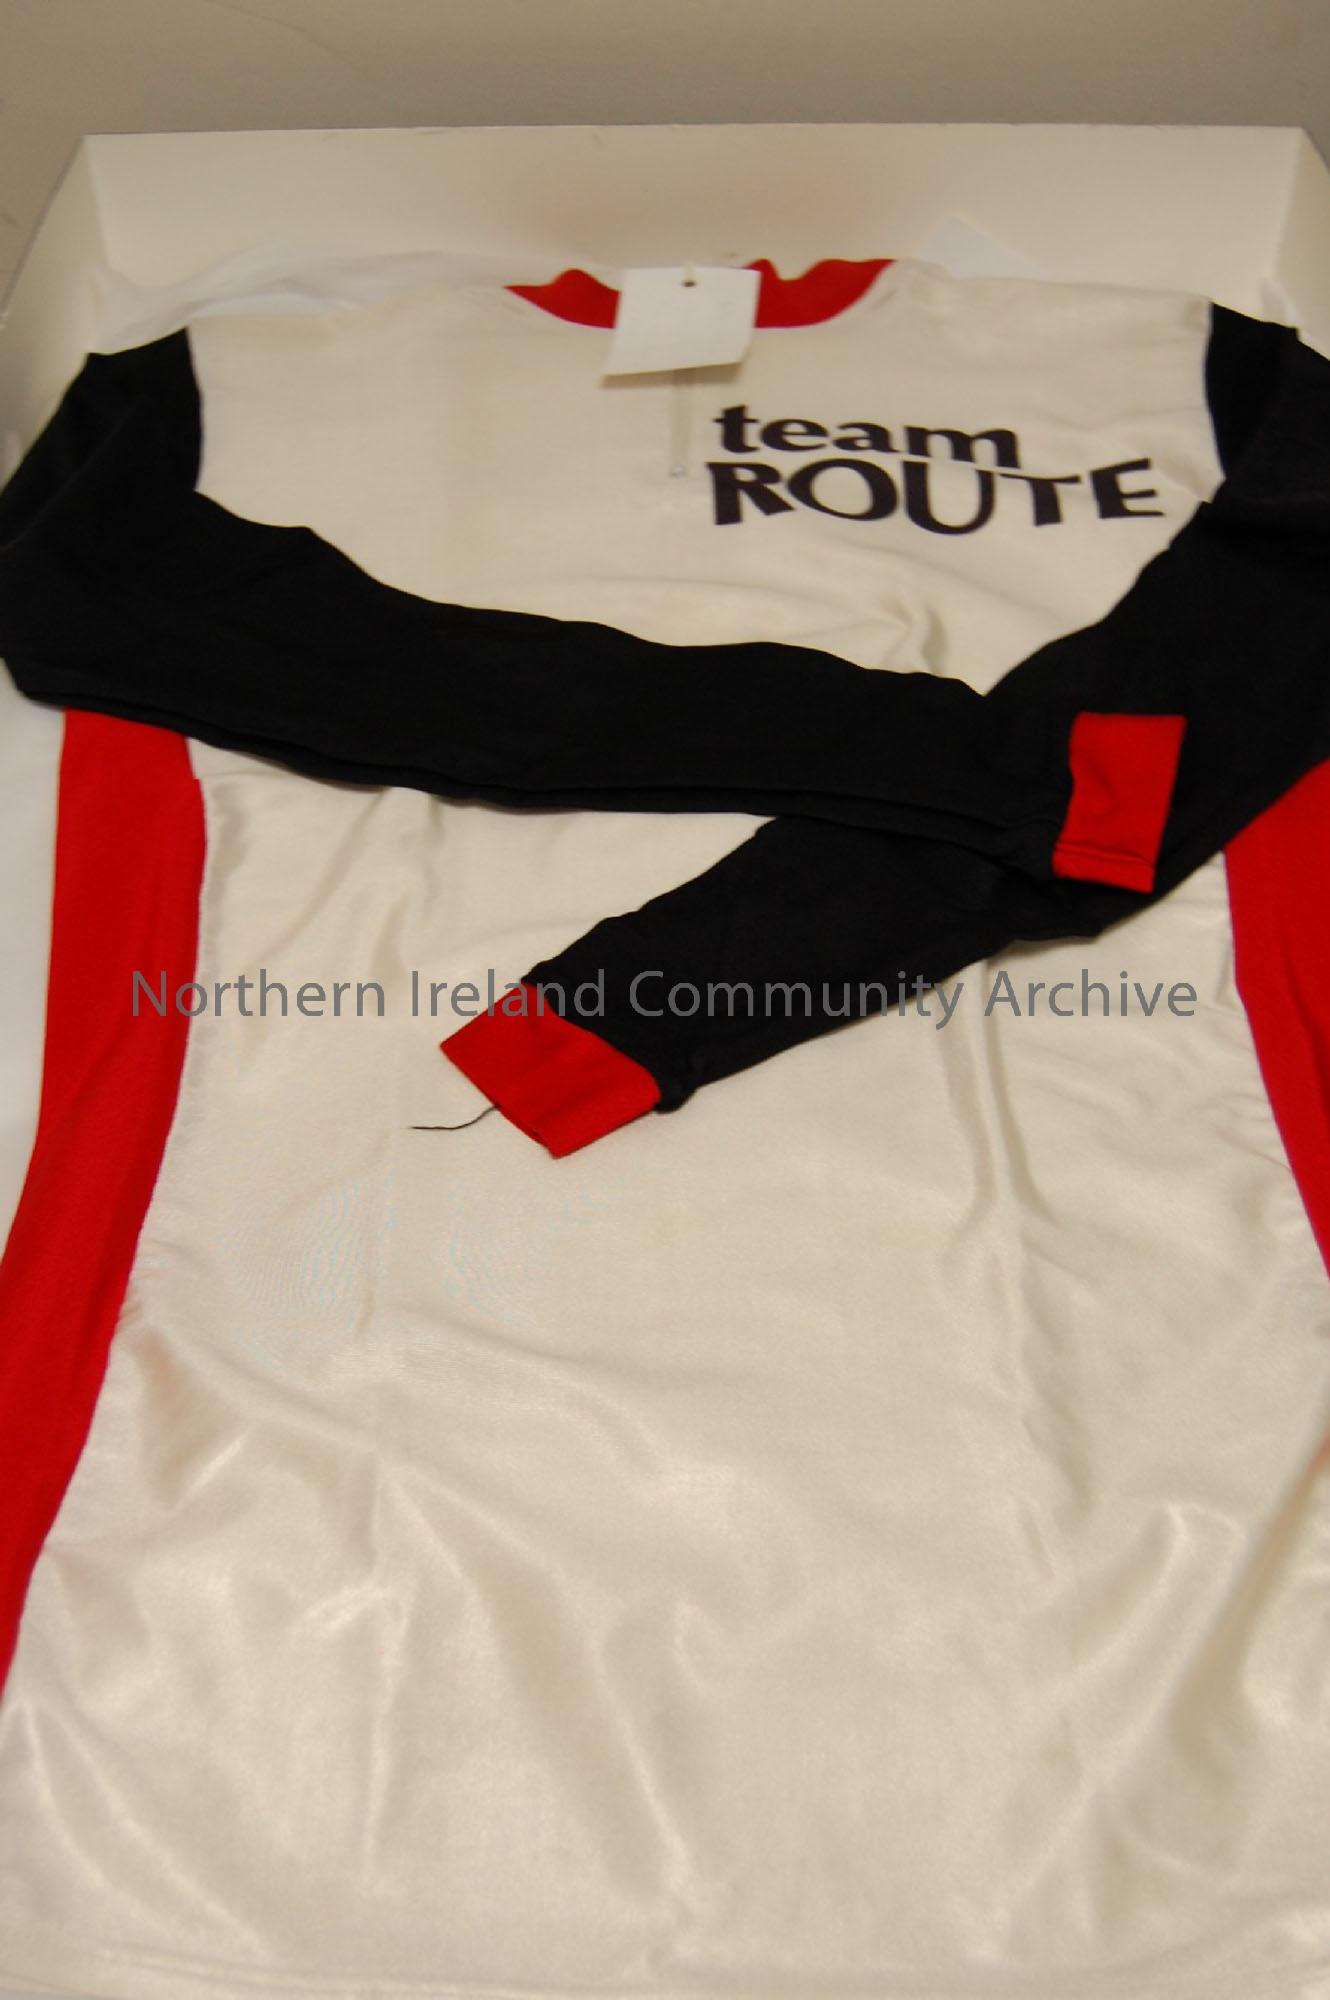 Ballymoney and District Cycle Club. Team Route original time trial/track jersey.